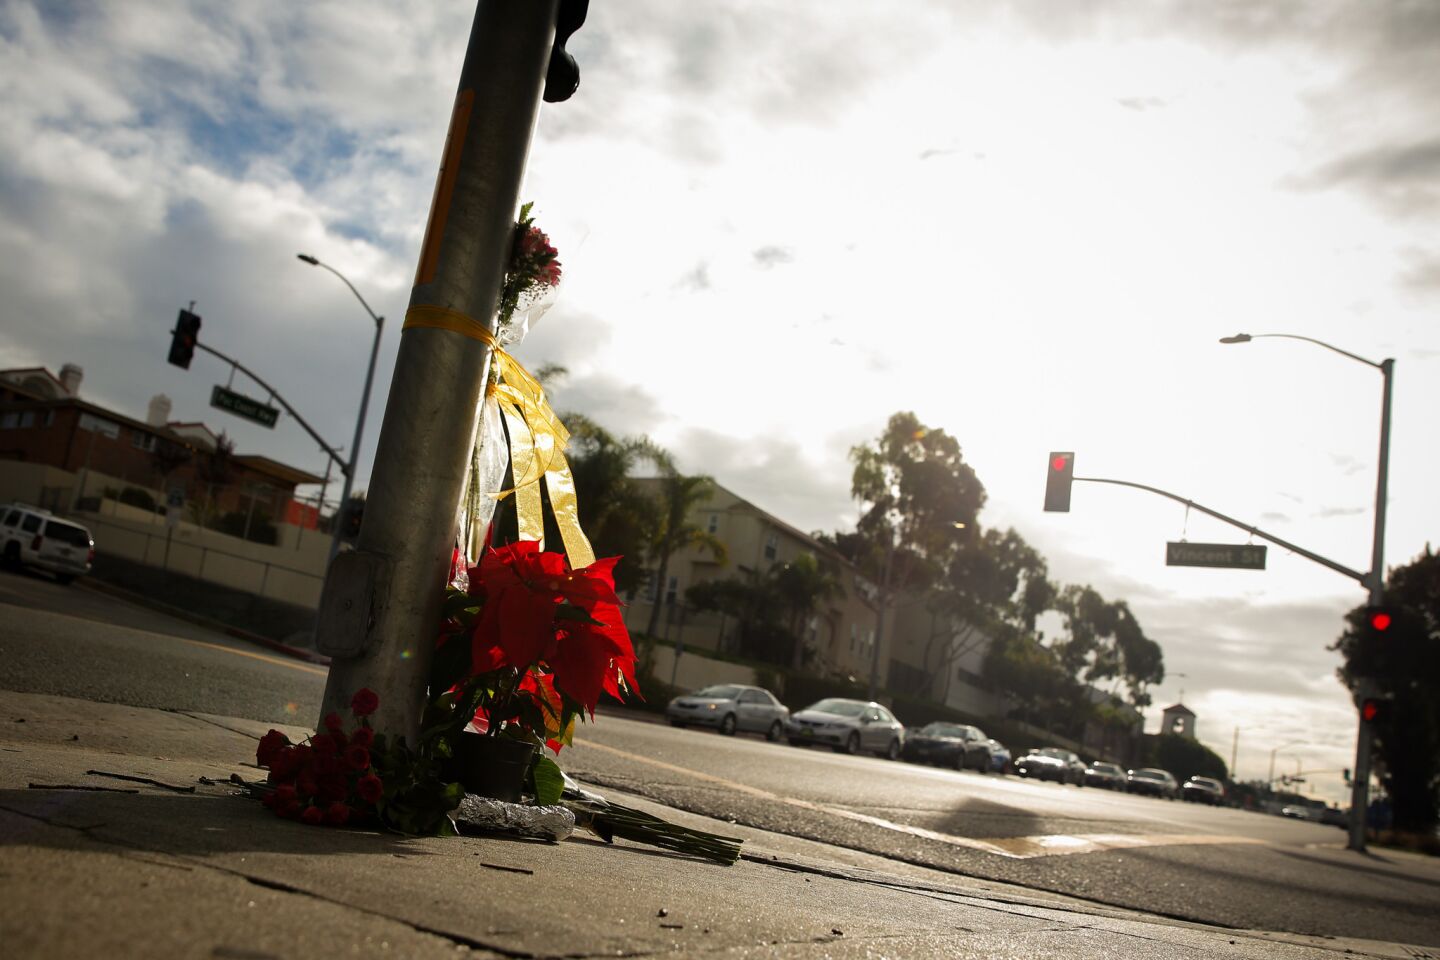 Flowers accumulate at the corner of Vincent Street and Pacific Coast Highway in Redondo Beach on Thursday, the morning after three women were killed when a car plowed into a group of people in a crosswalk in front of St. James Catholic Church.